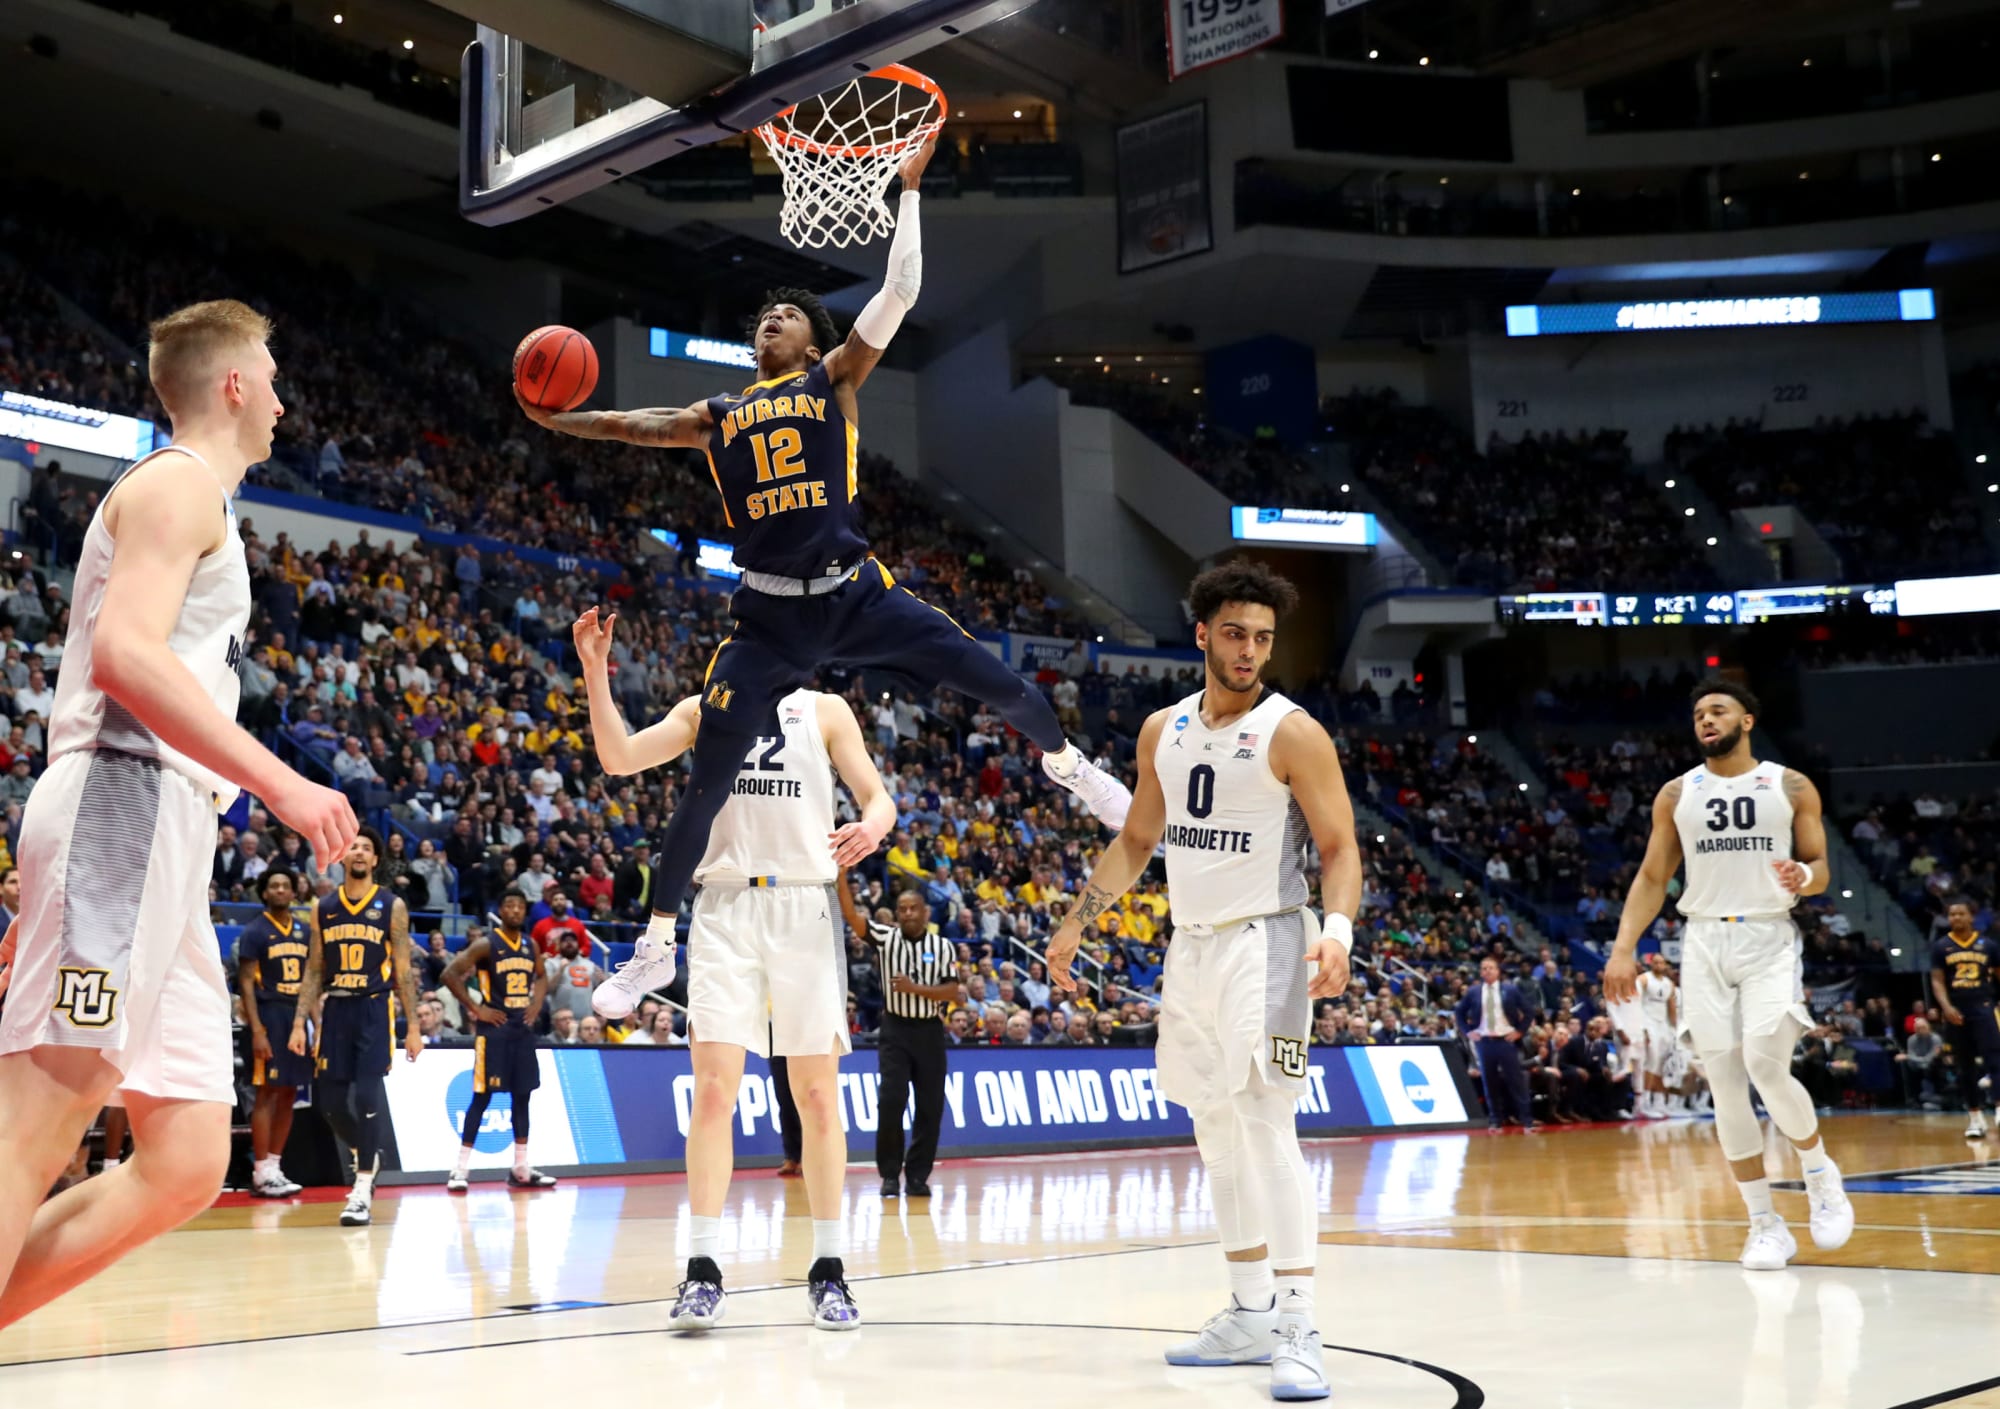 Ja Morant leads Murray State to a win over Marquette in the 2019